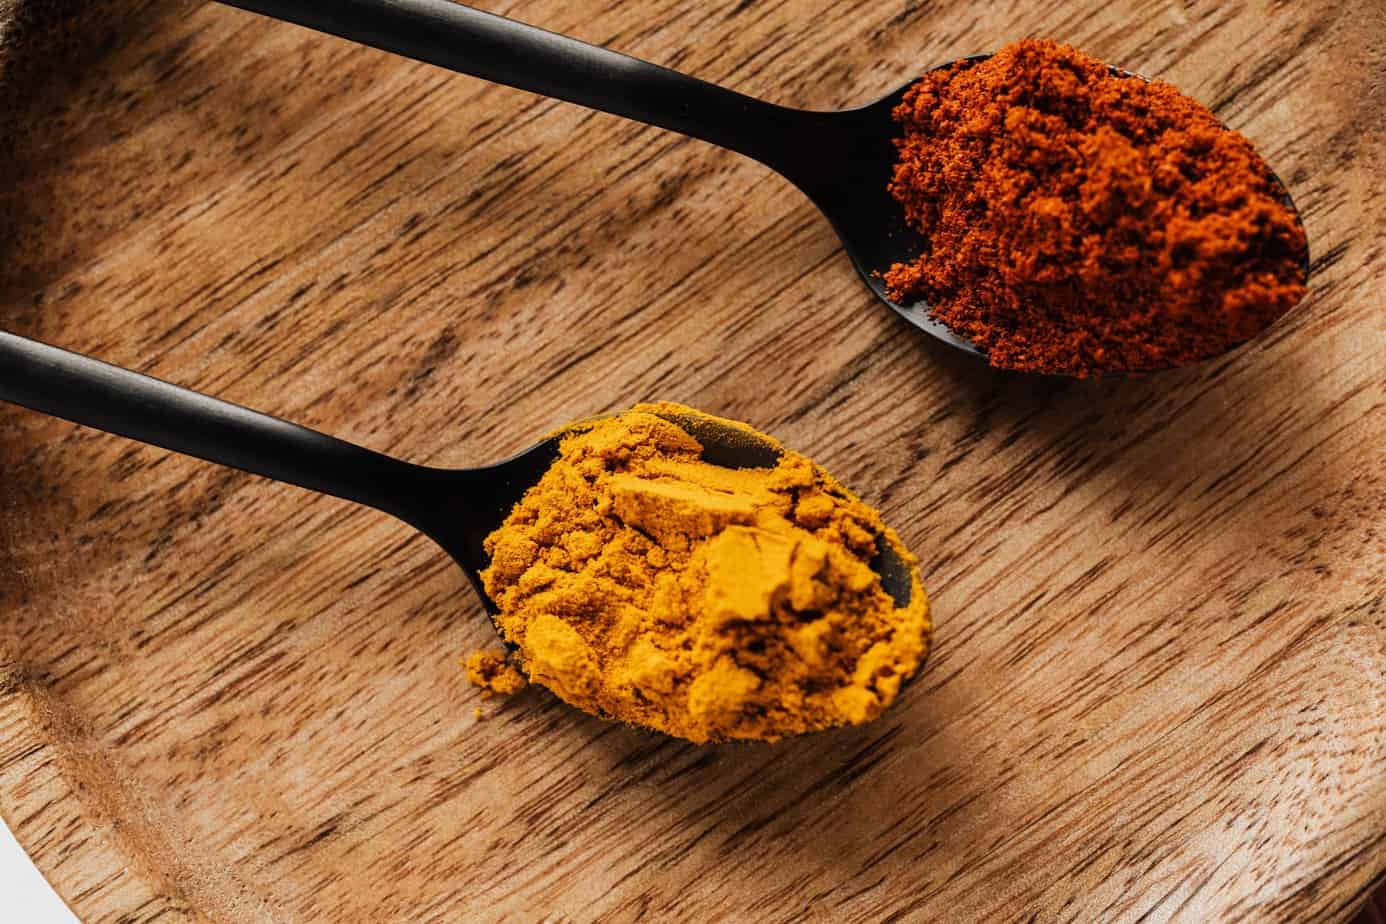 Turmeric as a natural remedy against arthritis pain and inflammation